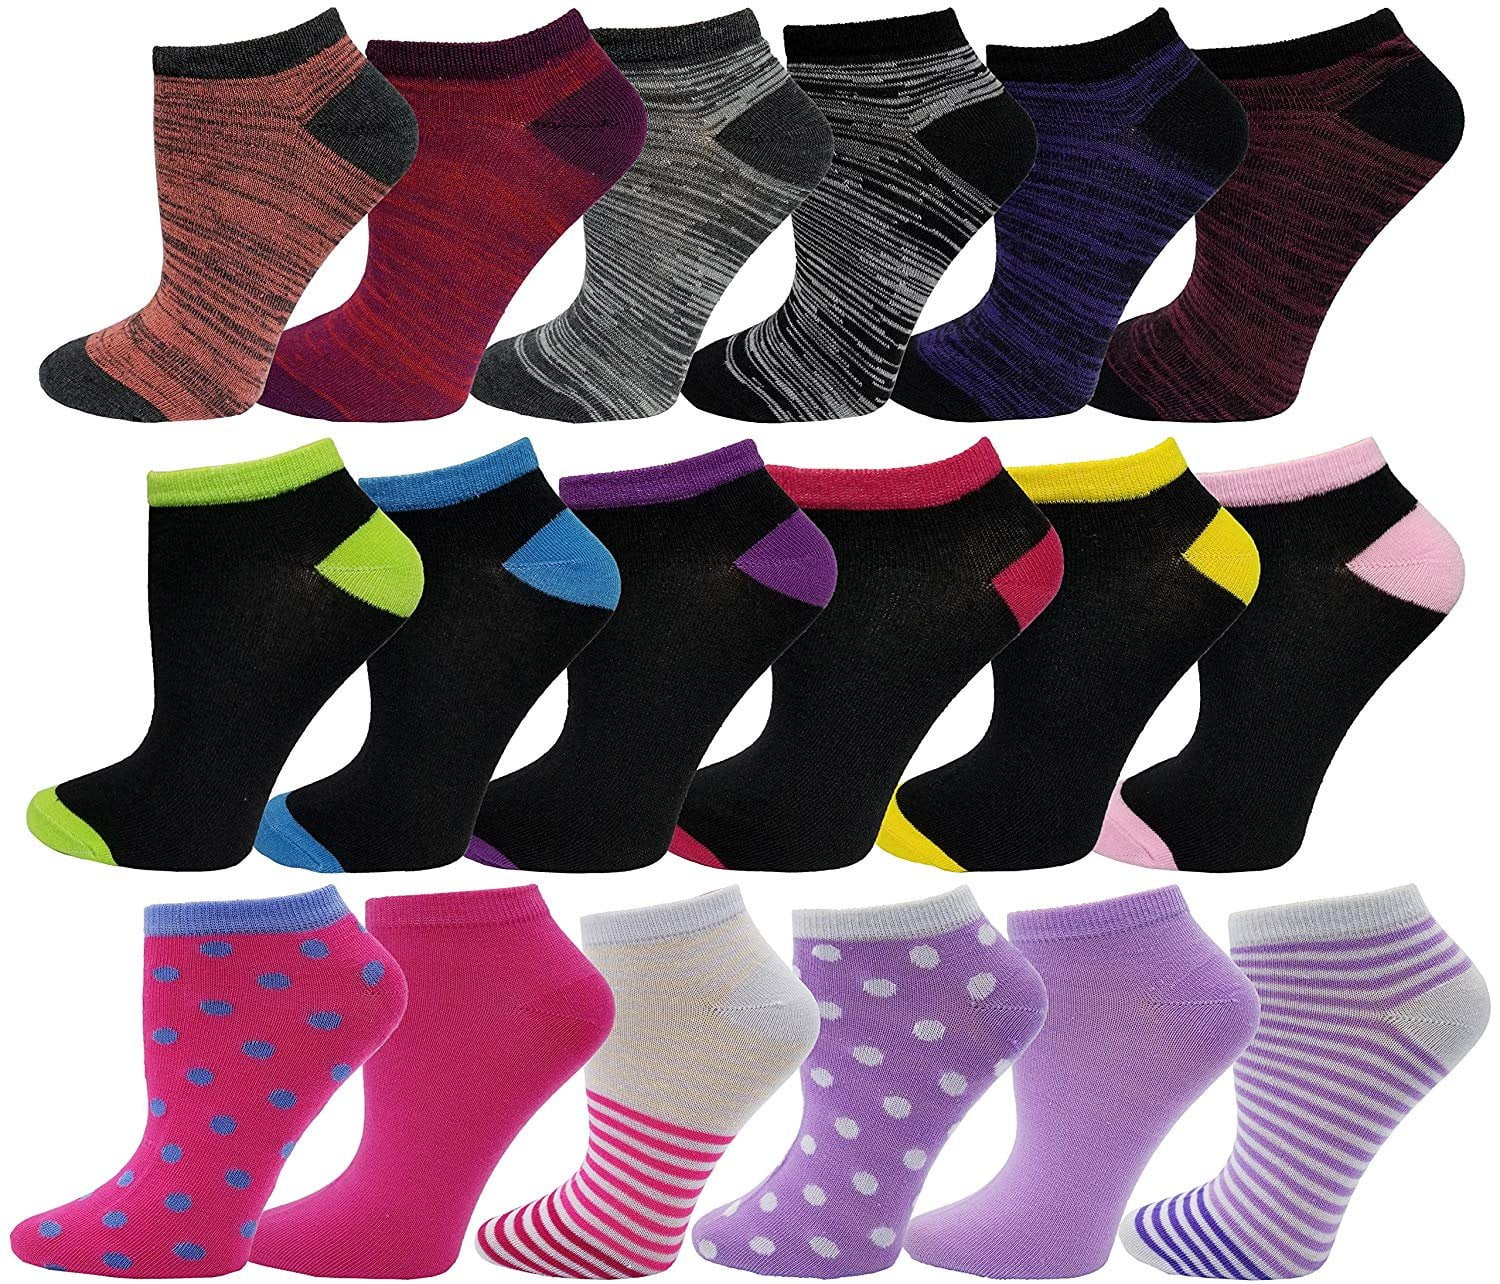 18 Pairs of Ankle Socks for Women, No Show Low Cut Funky Colorful ...